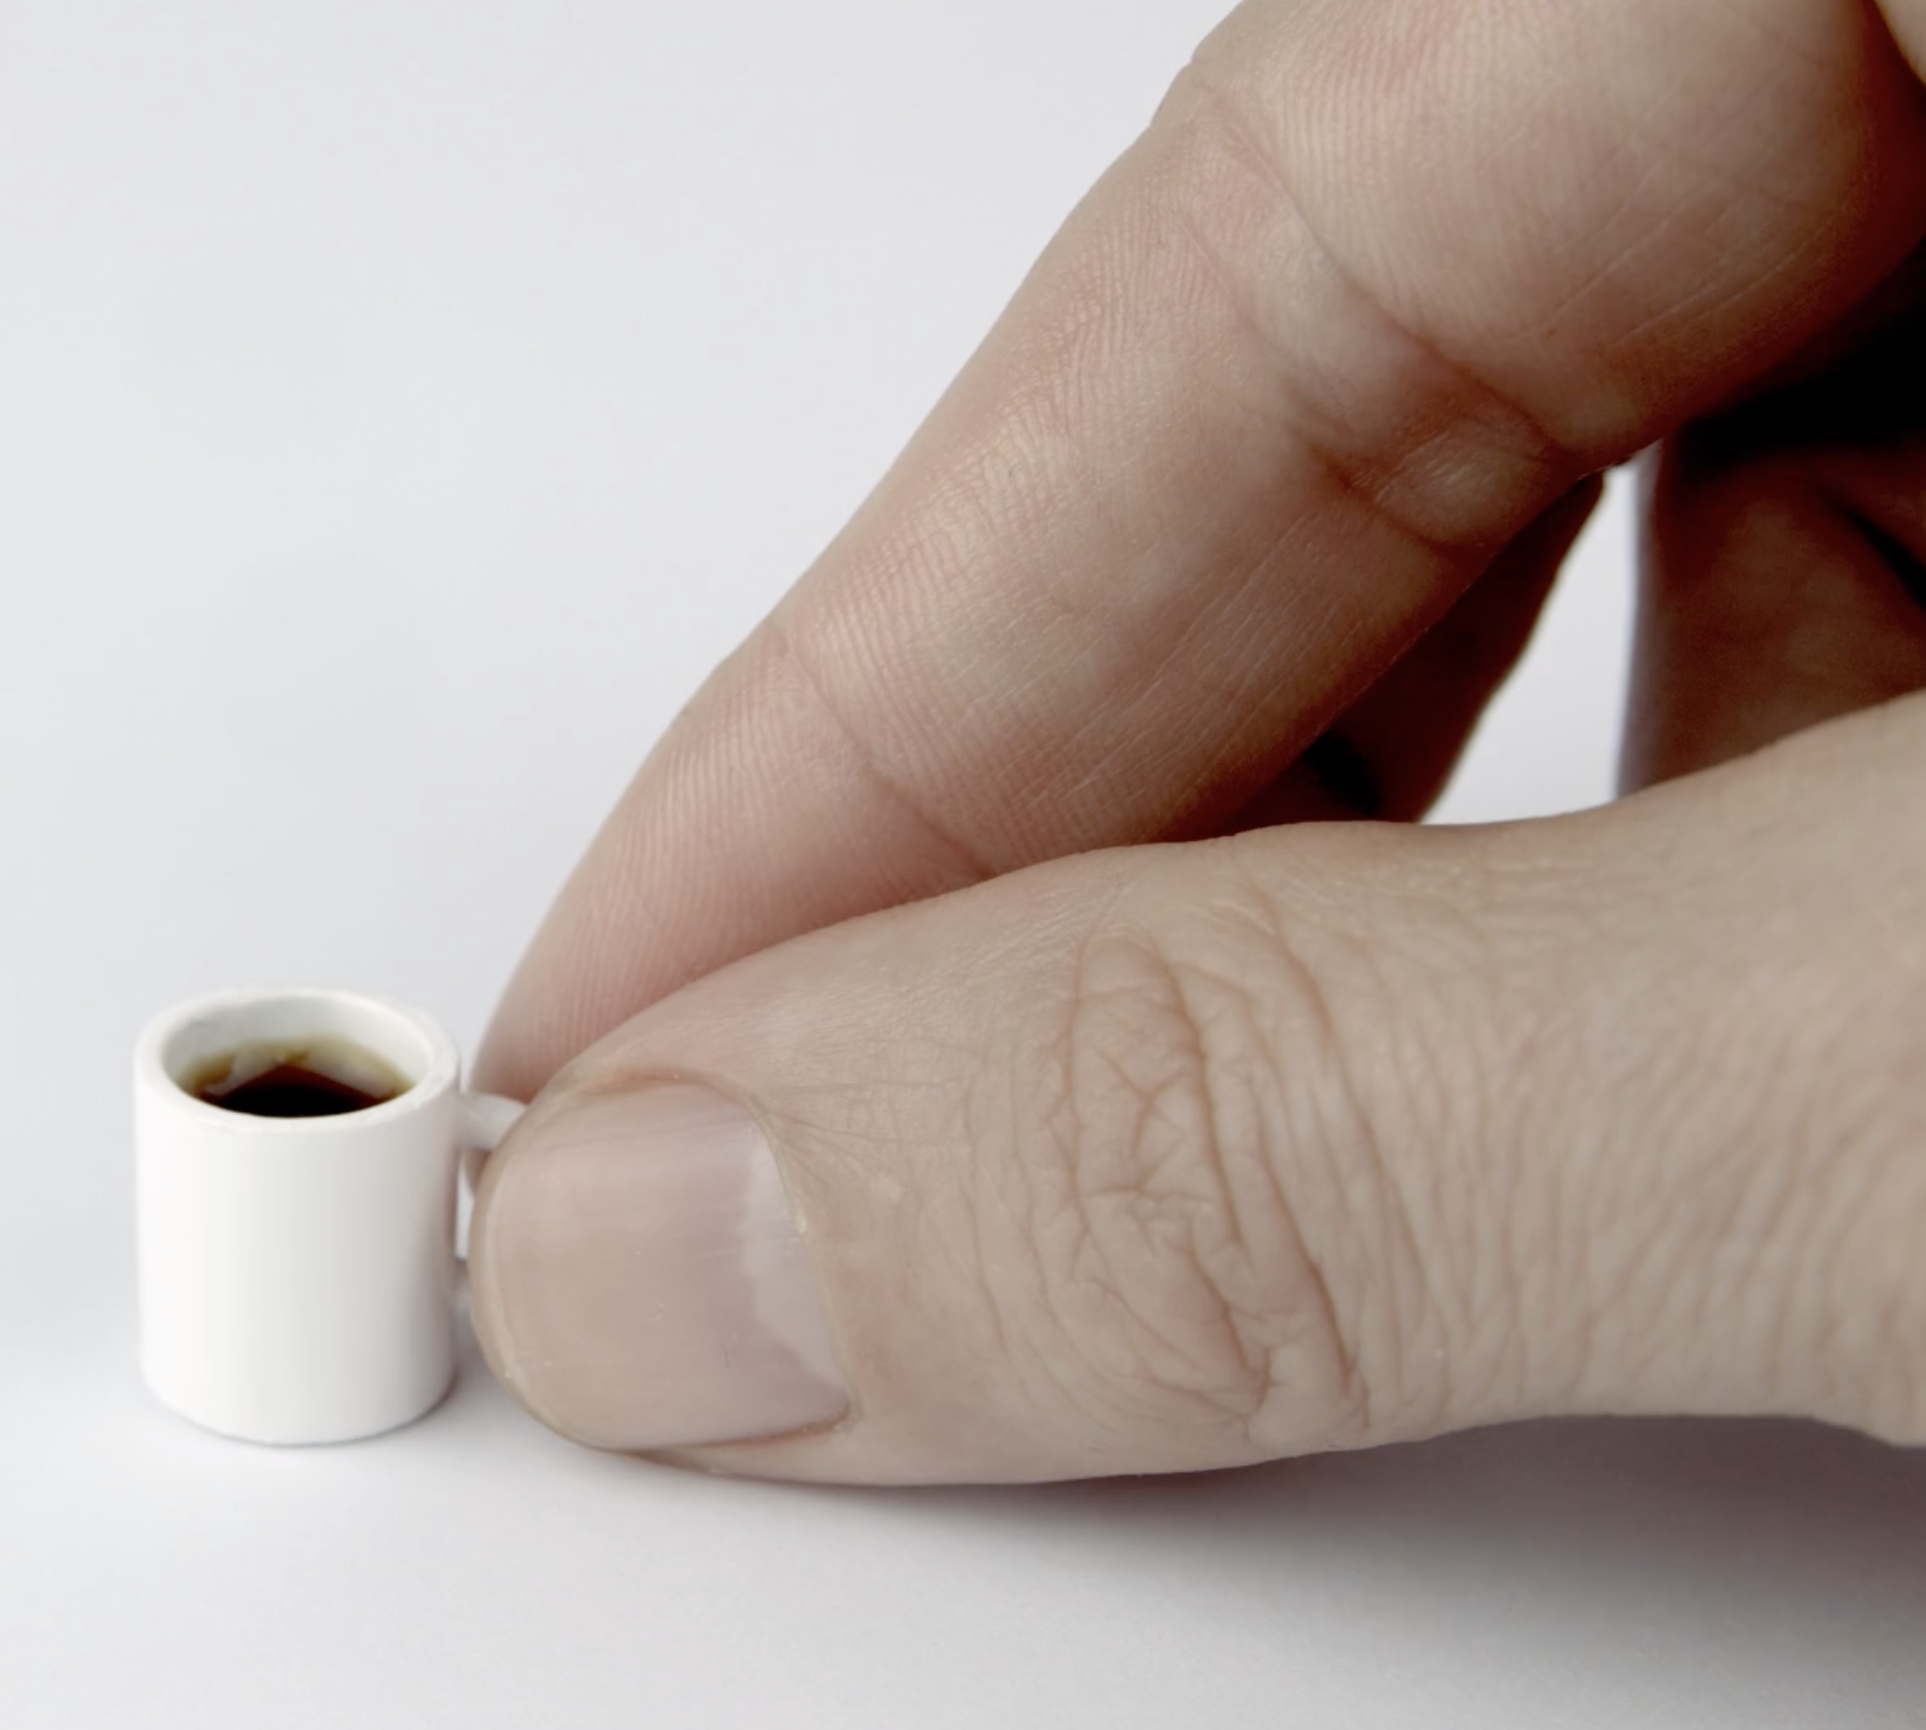 How to Make the Worlds Smallest Cup of Coffee  Colossal [Video]